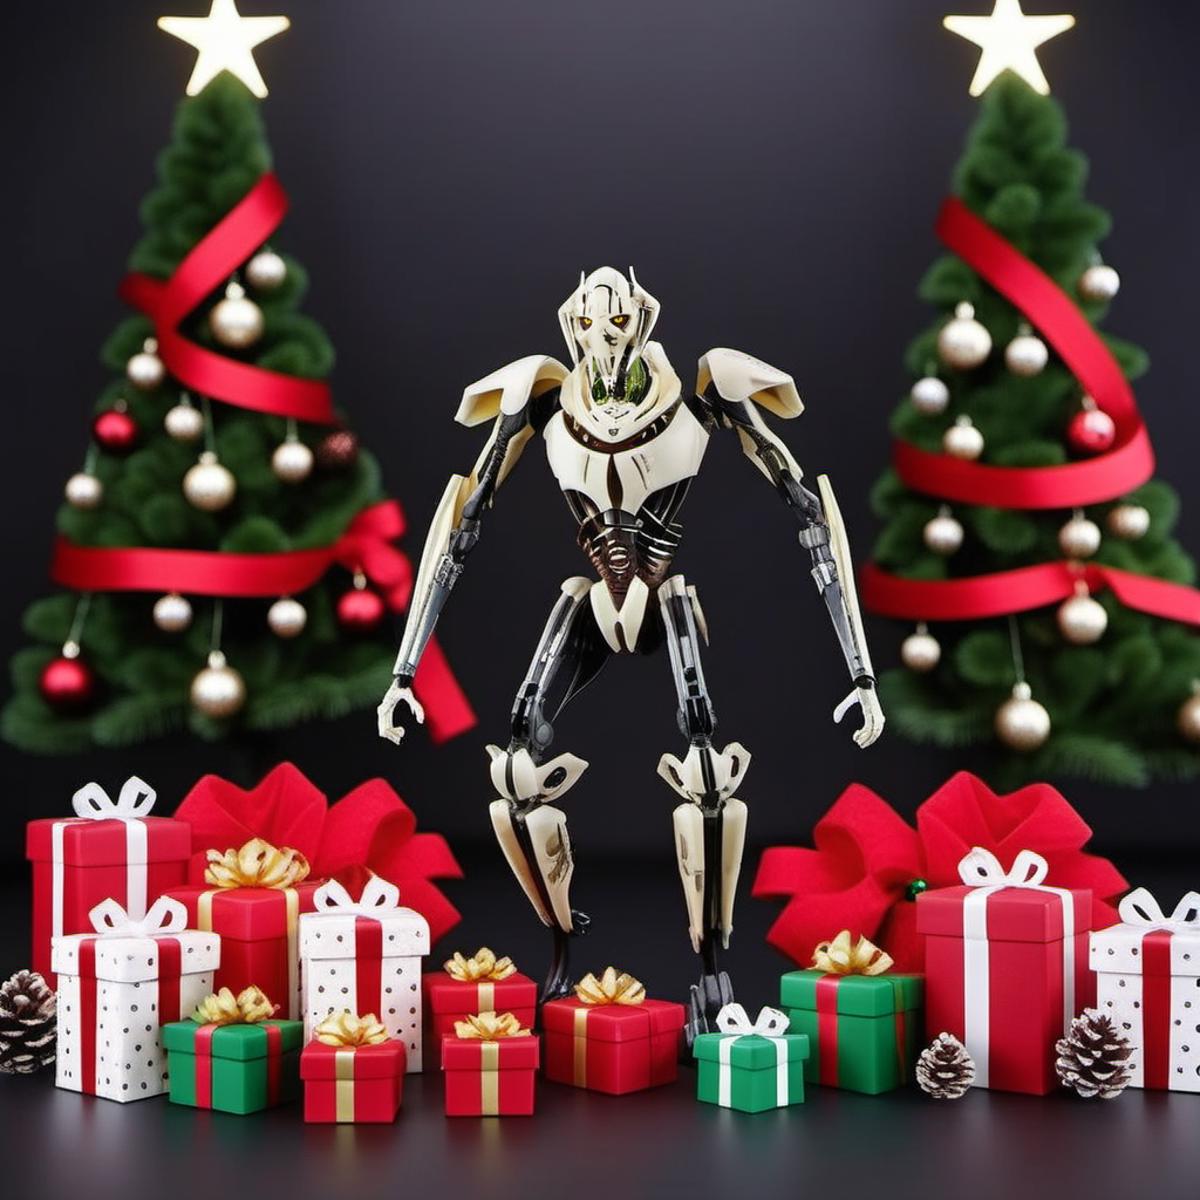 General Grievous - Star Wars - SDXL image by PhotobAIt